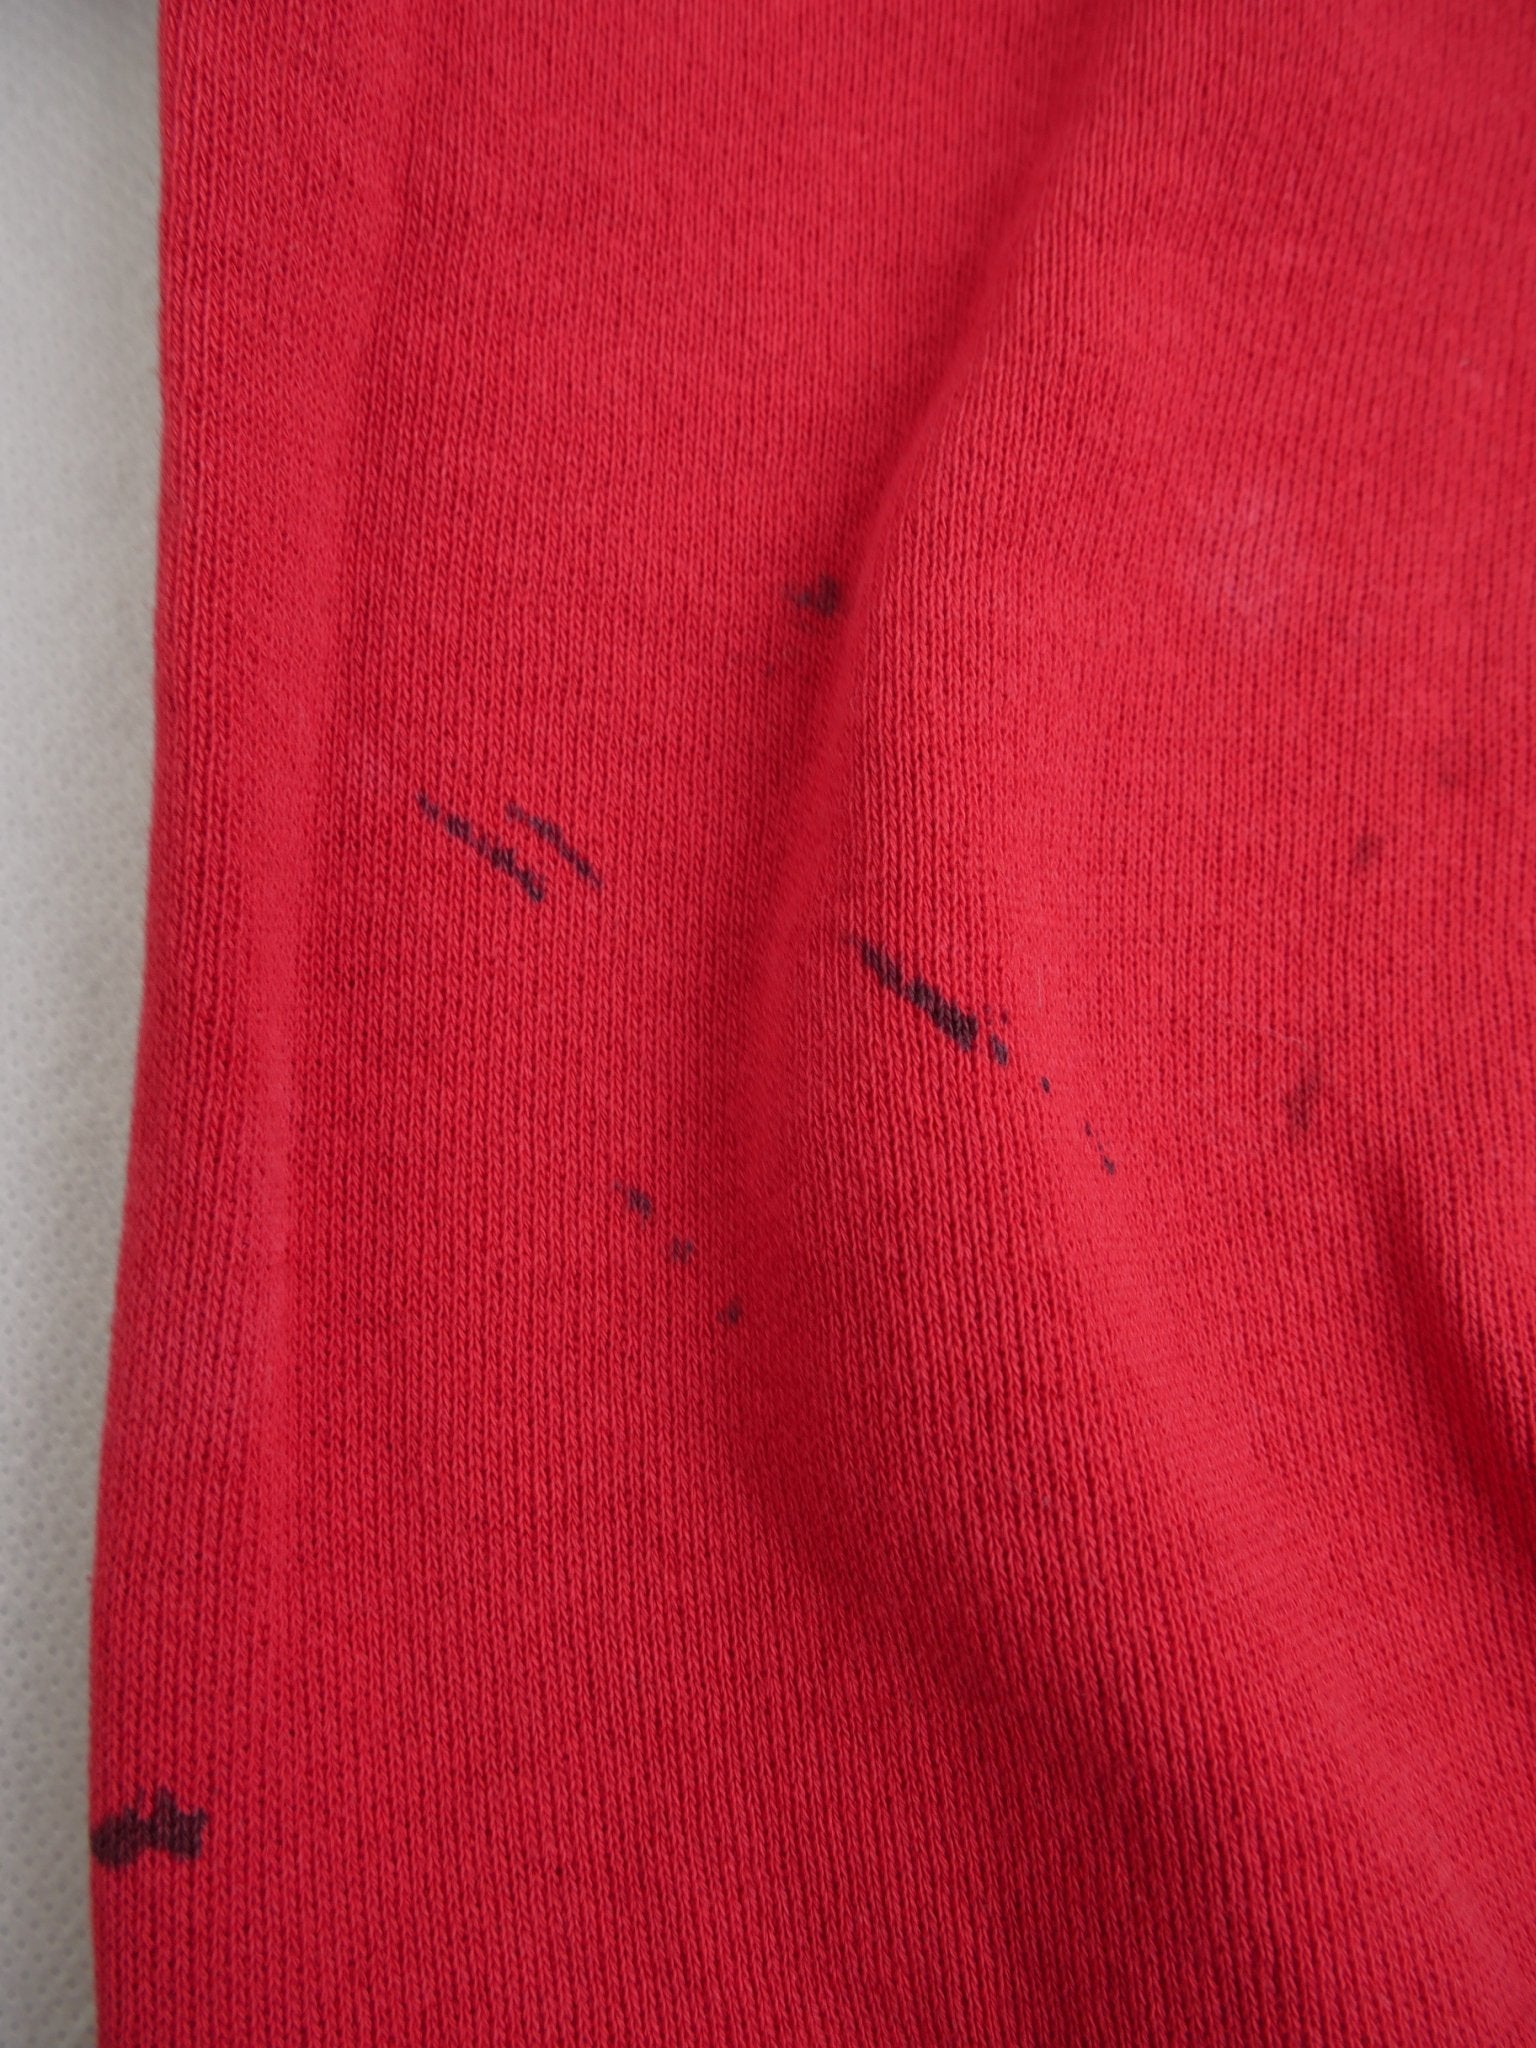 embroidered doll red Sweater - Peeces